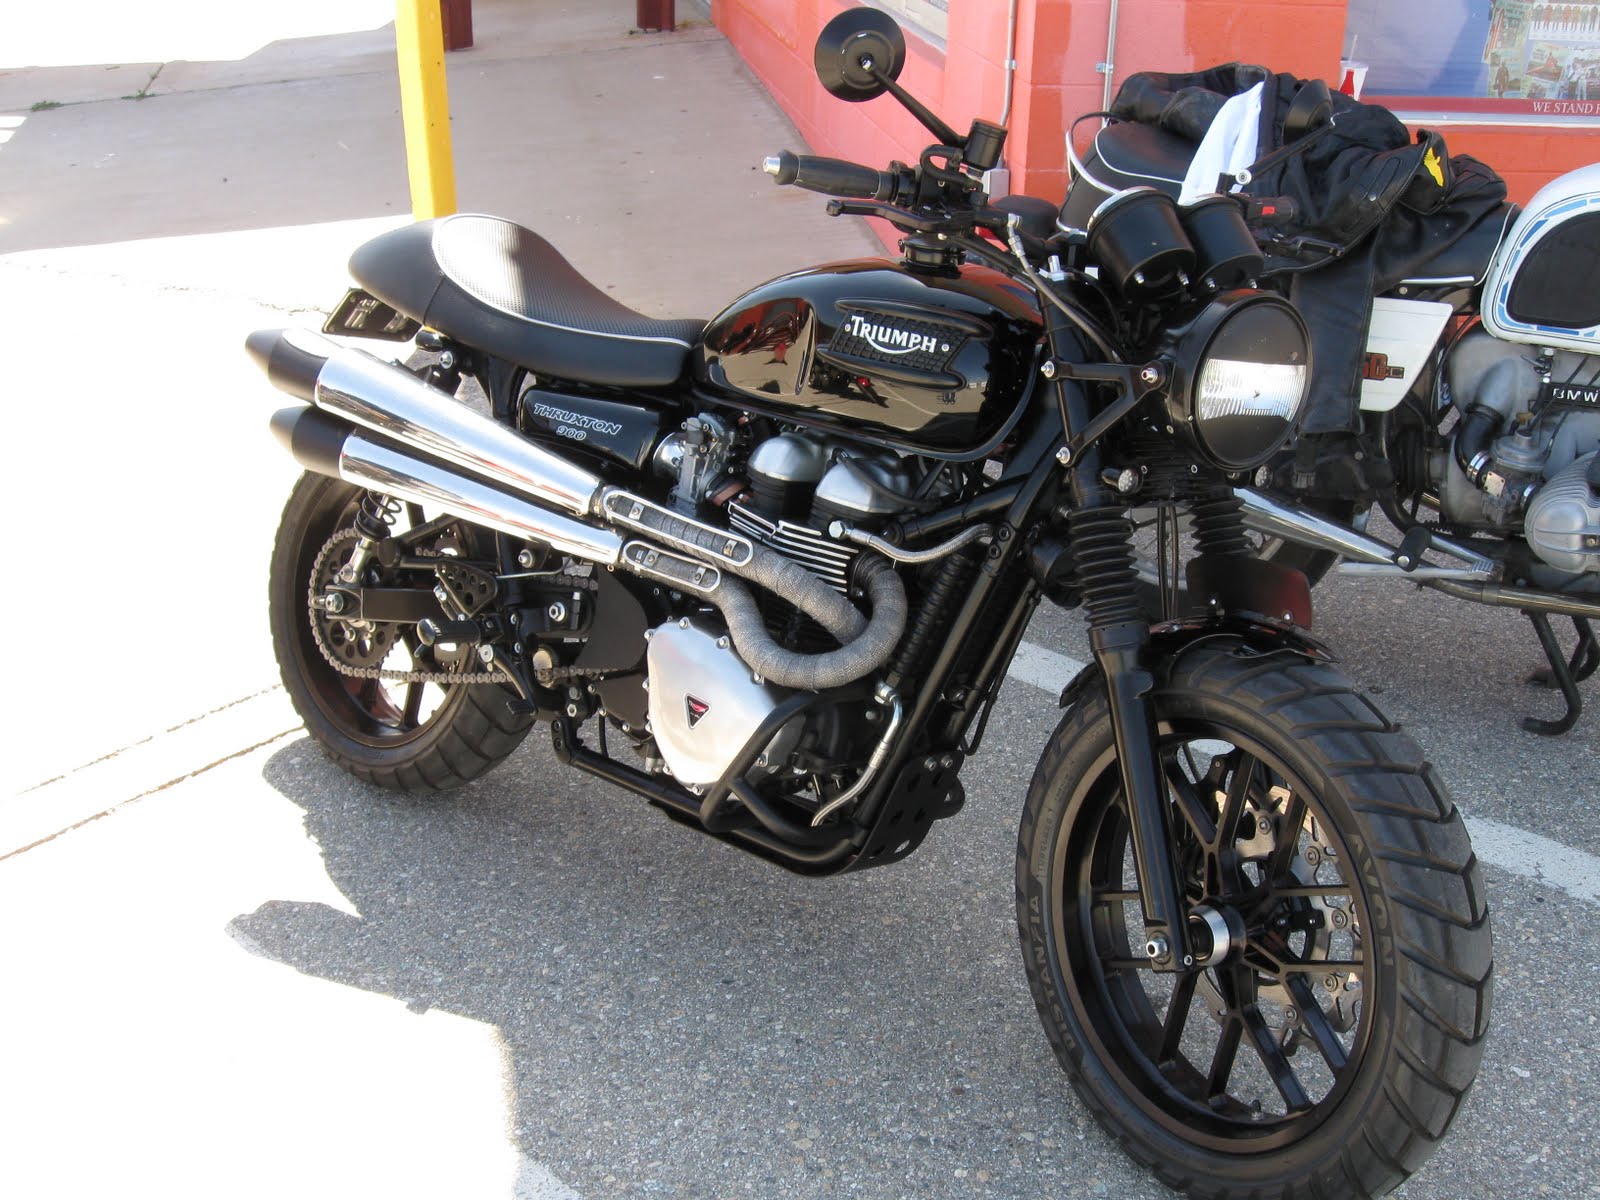 suzuki gsxr 600 black for sale SITE HAS MOVED!! Please go to: motorcyclephotooftheday.com